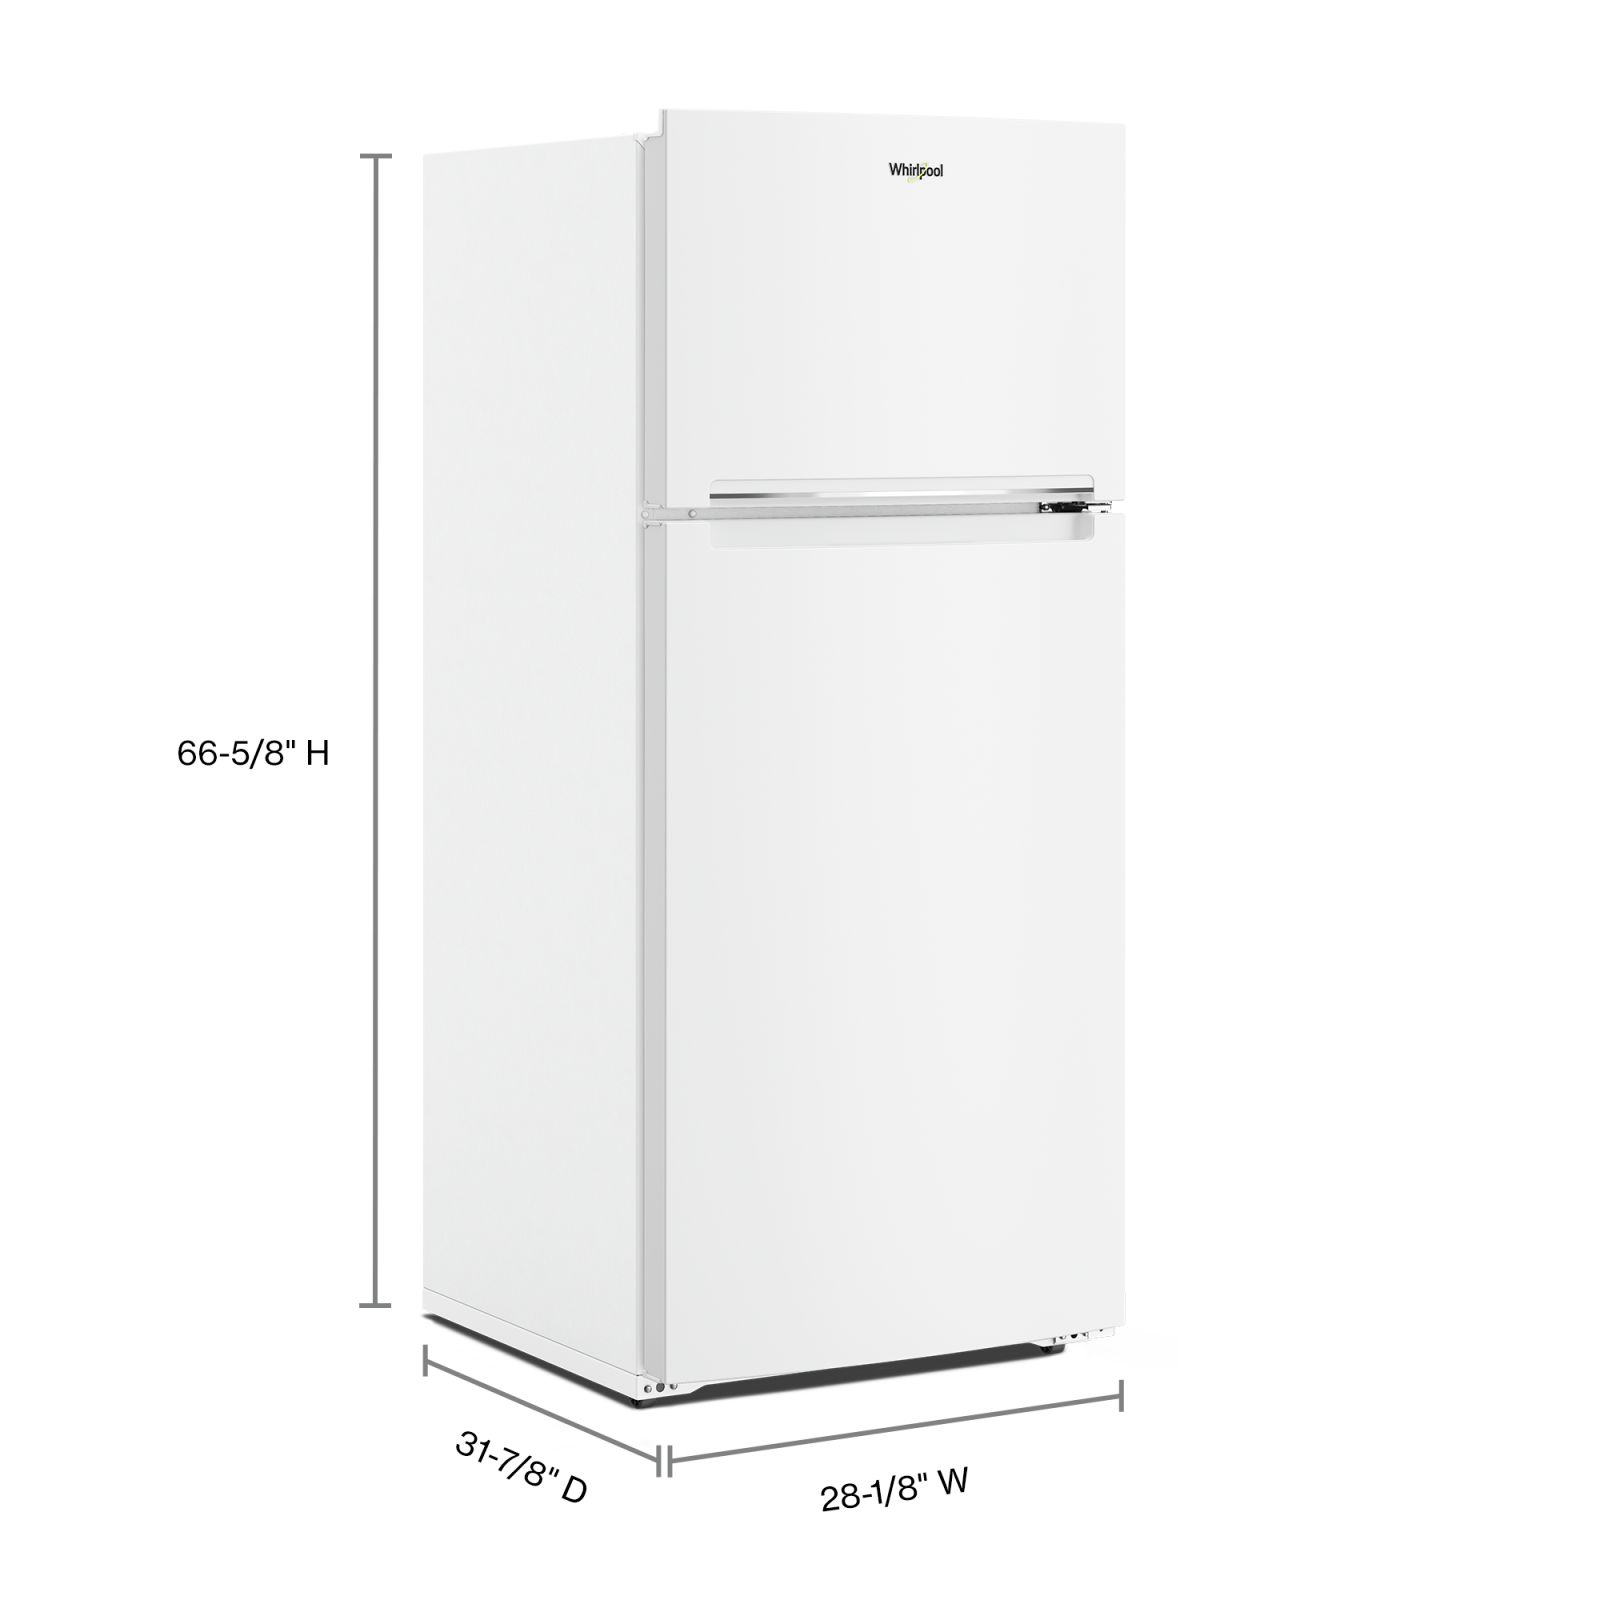 Whirlpool - 28.13 Inch 16.6 cu. ft Top Mount Refrigerator in White - WRTX5028PW